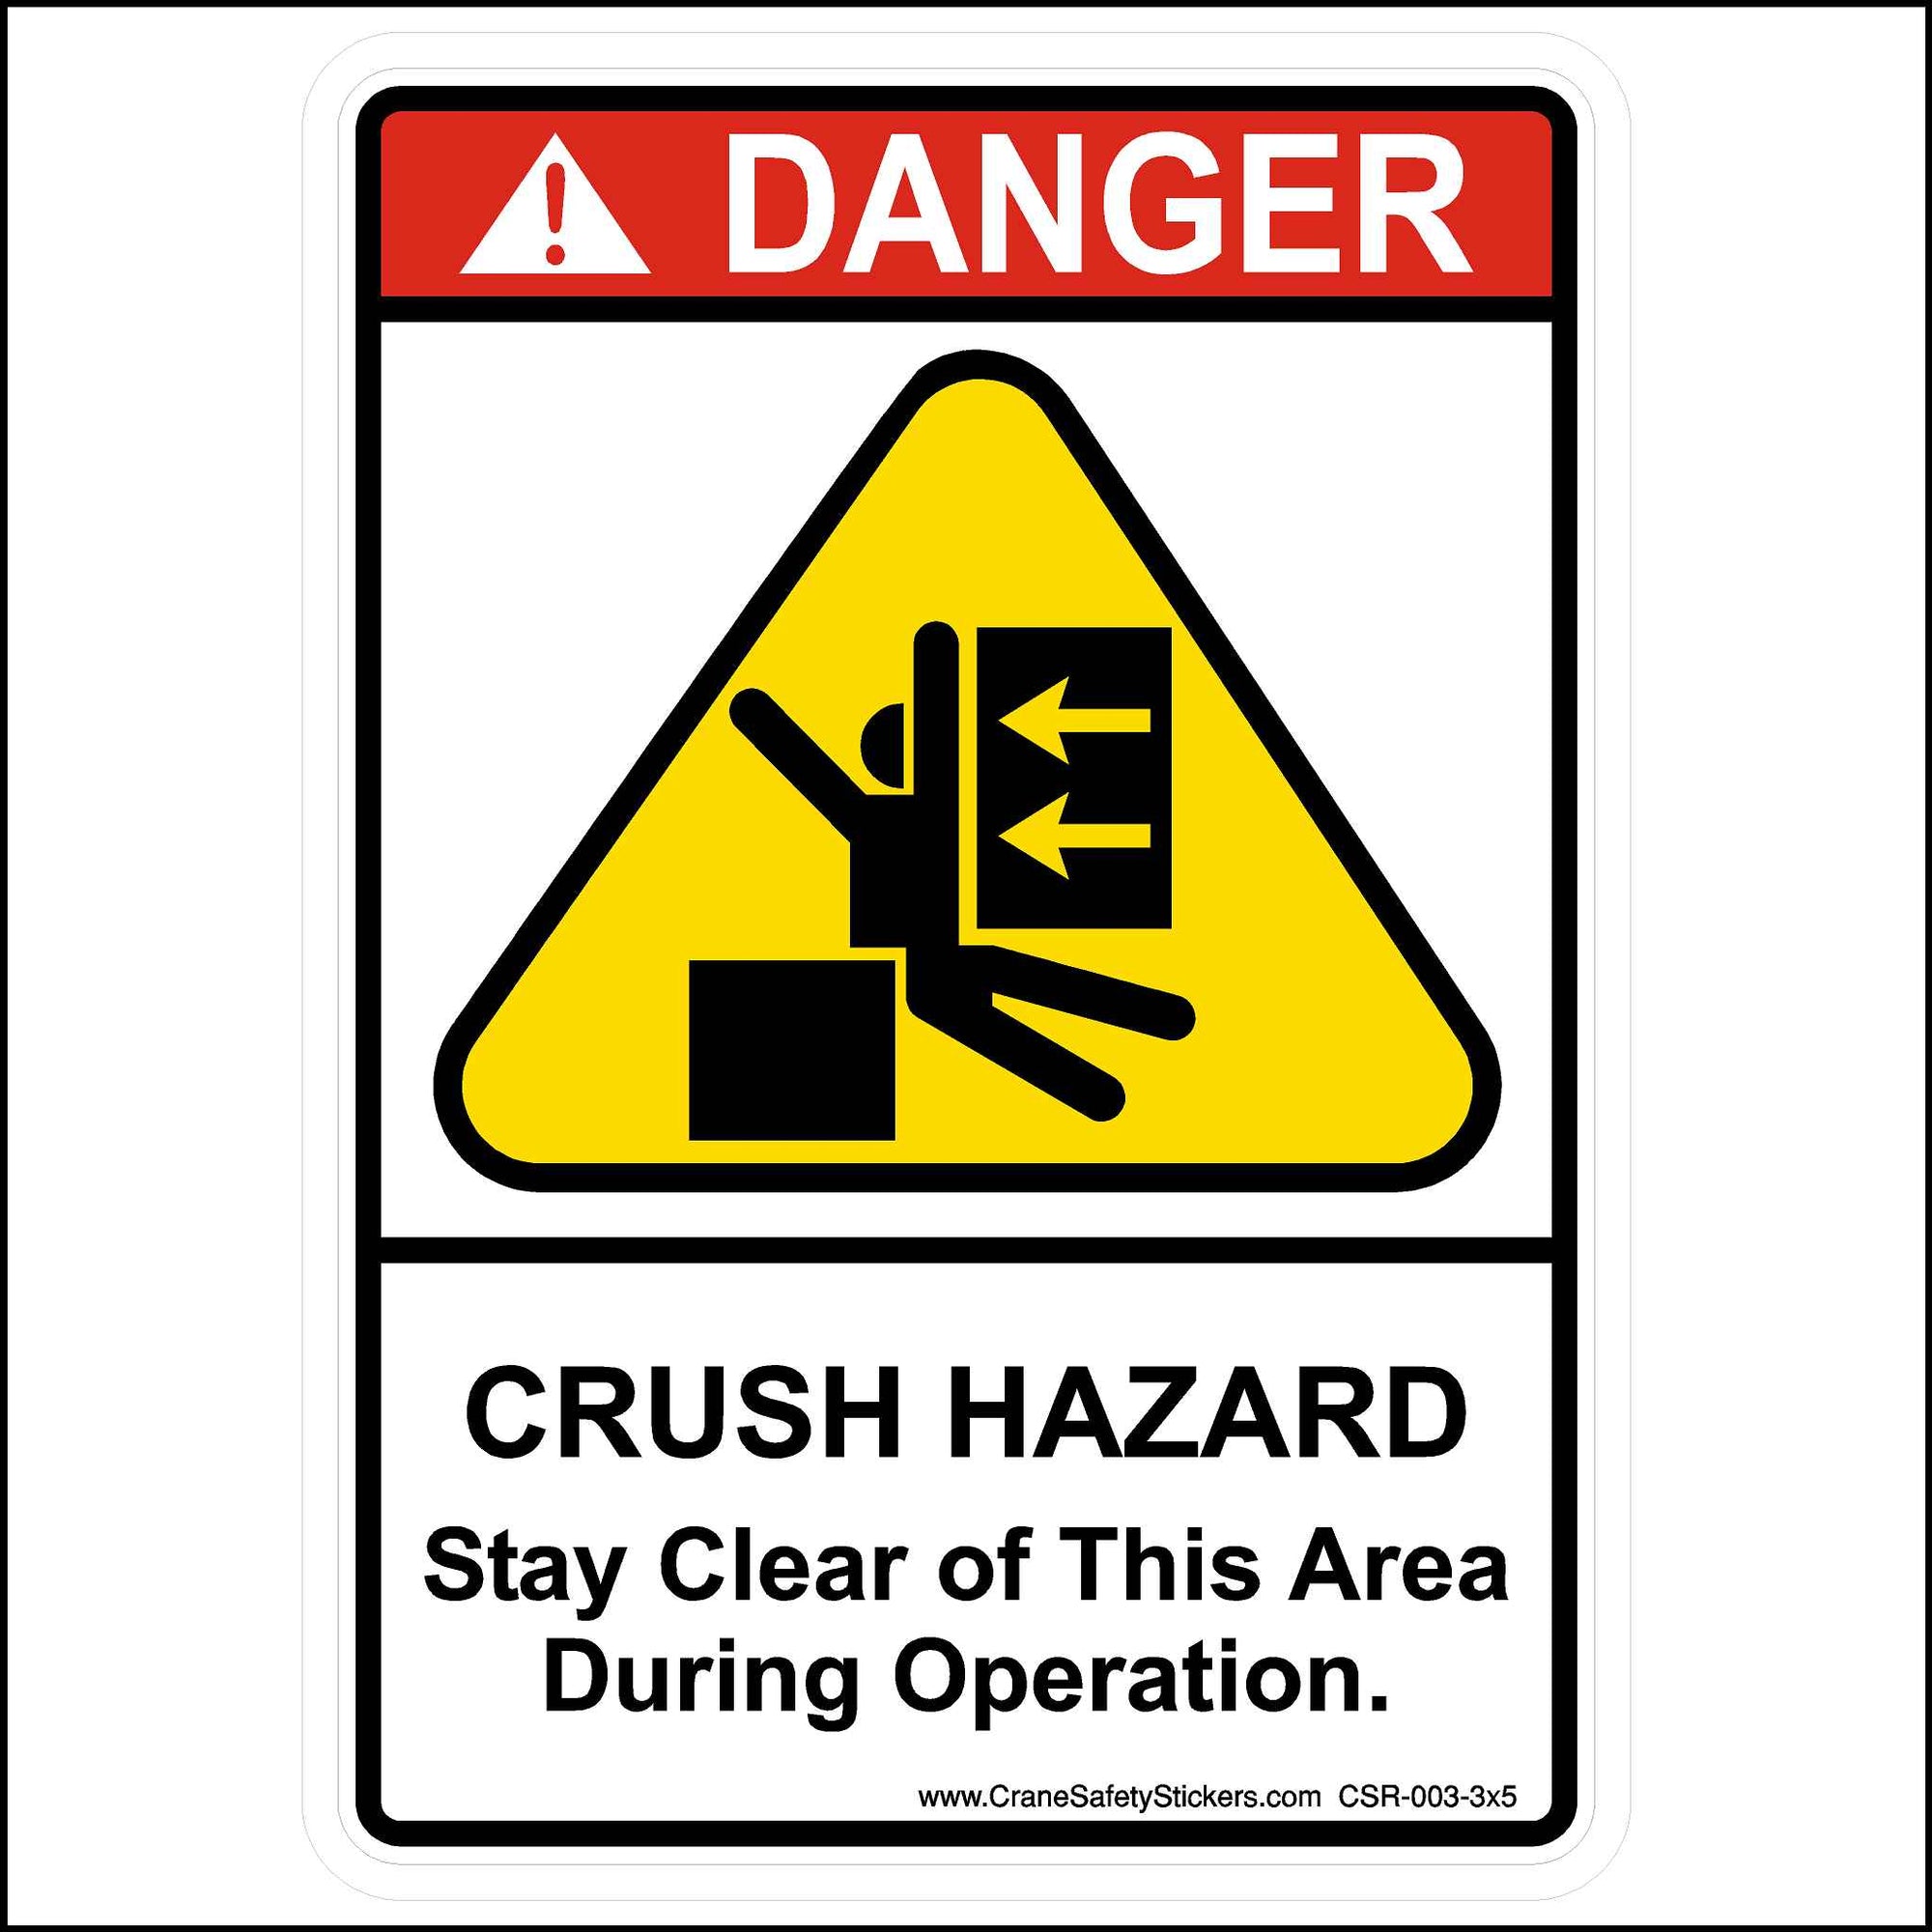 3 by 5 Inch Crane Sticker Printed With DANGER! CRUSH HAZARD, Stay Clear of This Area During Operation.